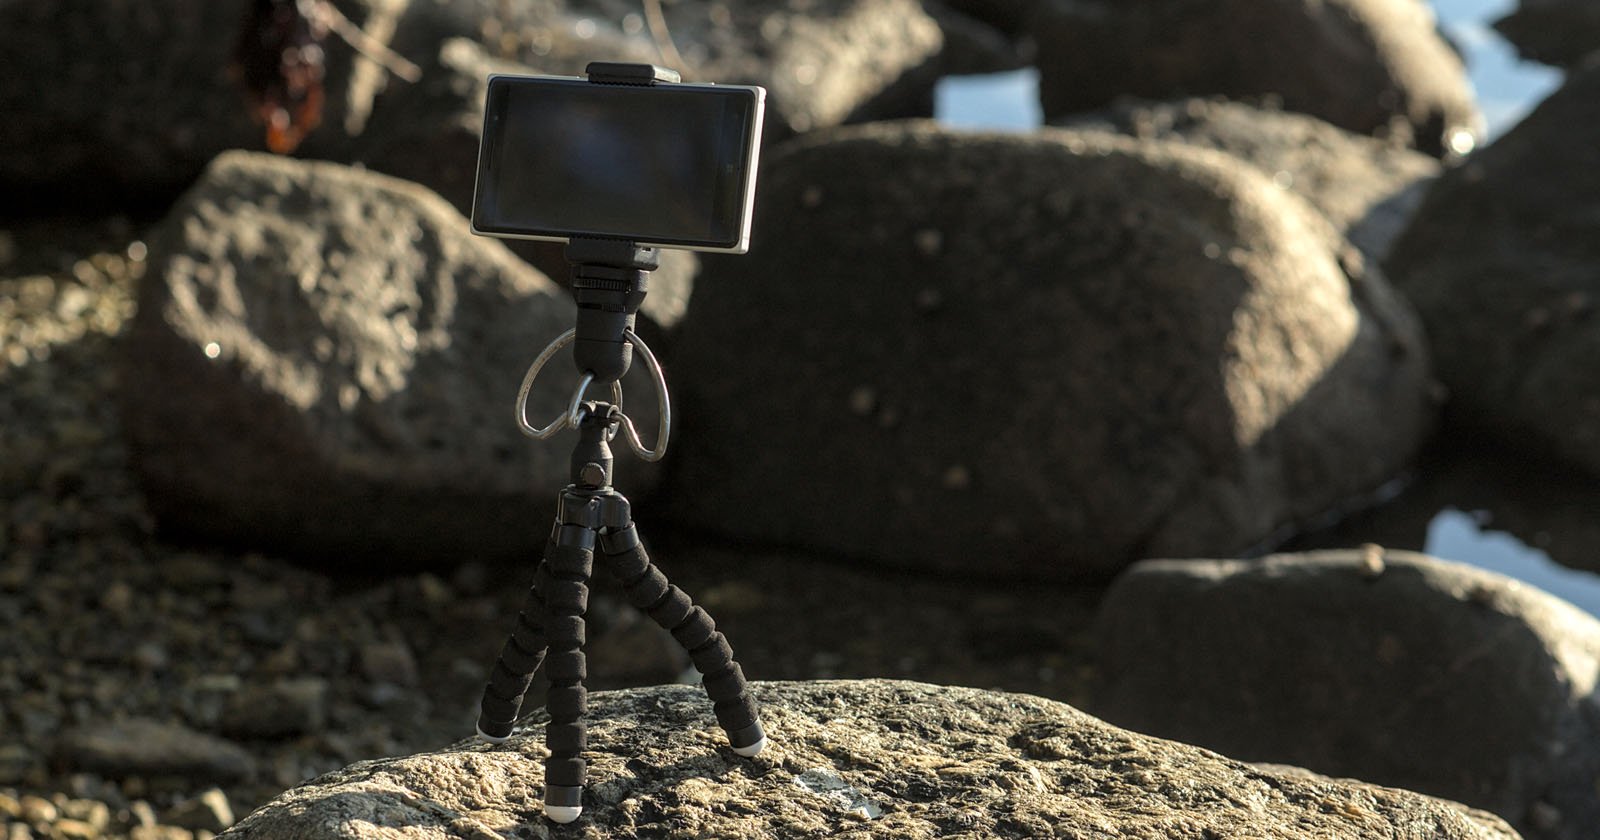 Sandmarc's New Carbon Fiber Tripod is Made Specifically for iPhone